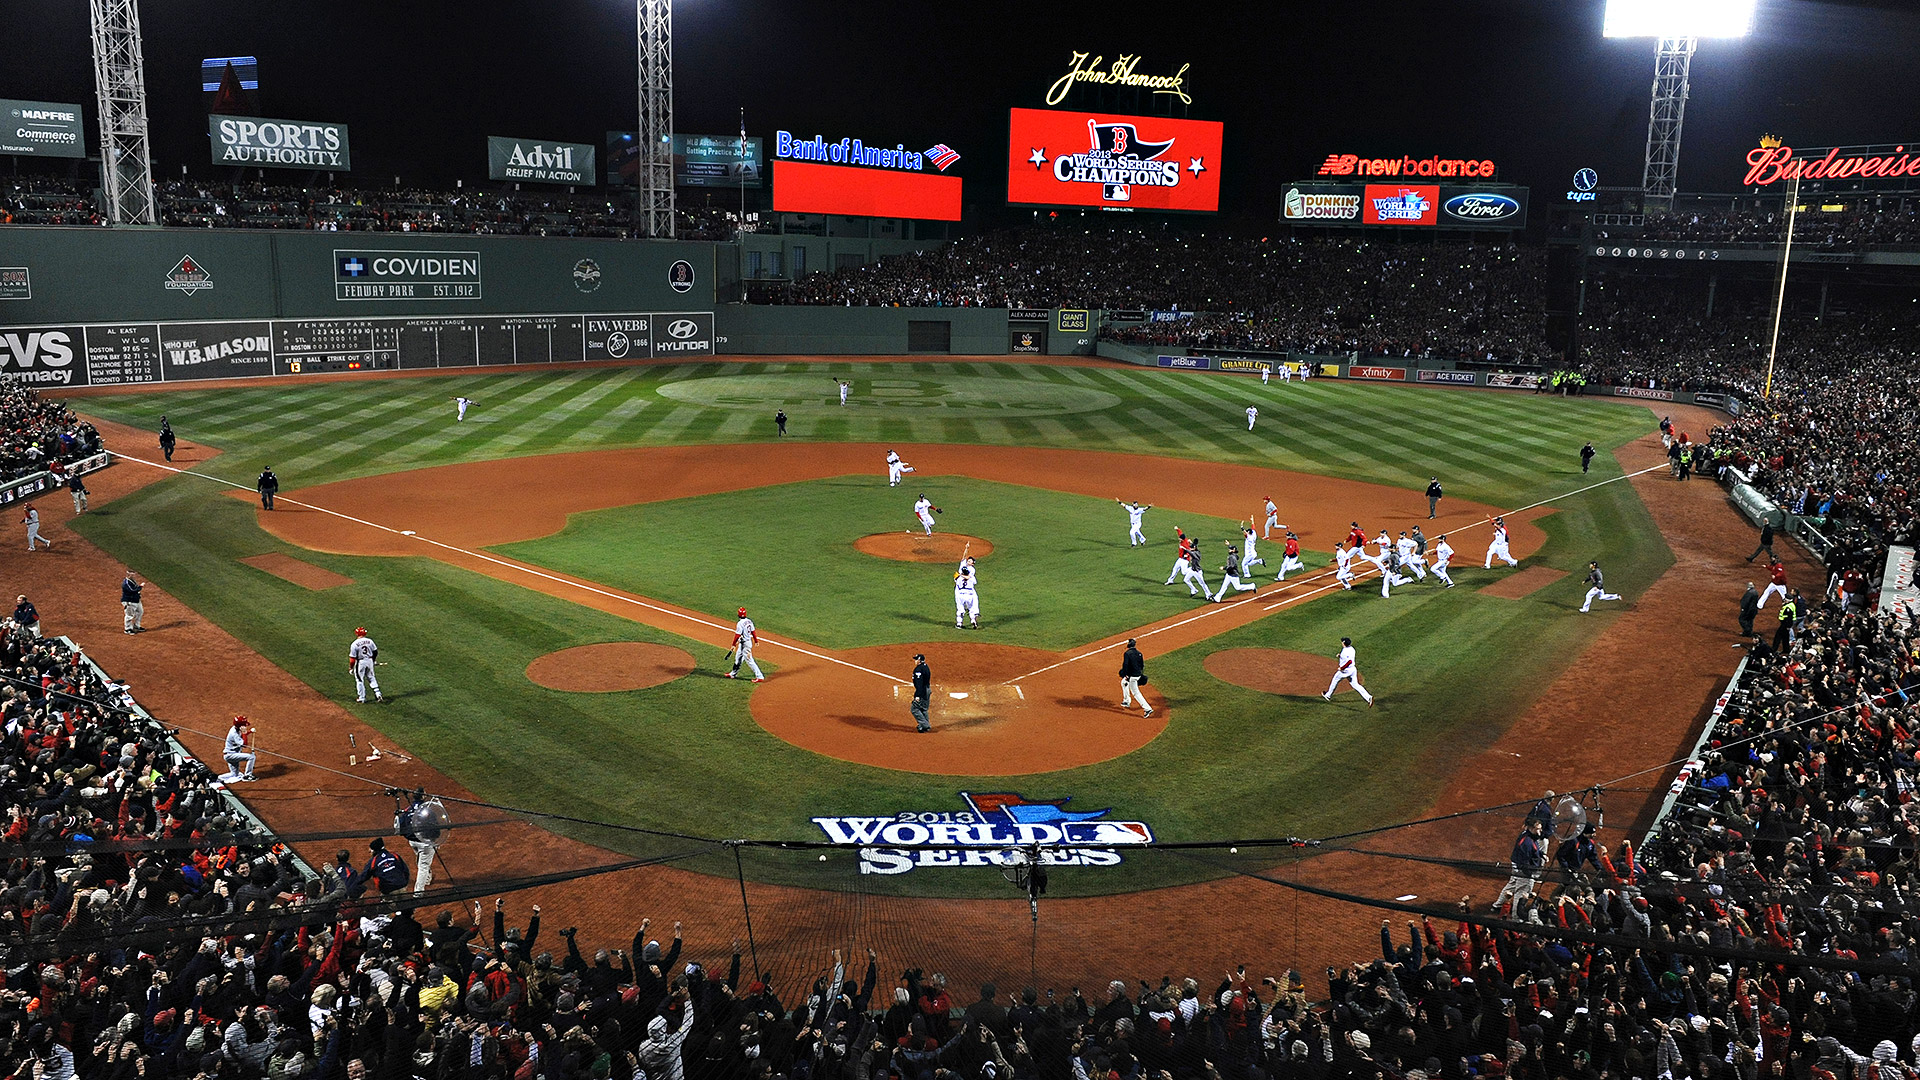 Can Fenway Park handle a football game? - SportsNation - ESPN